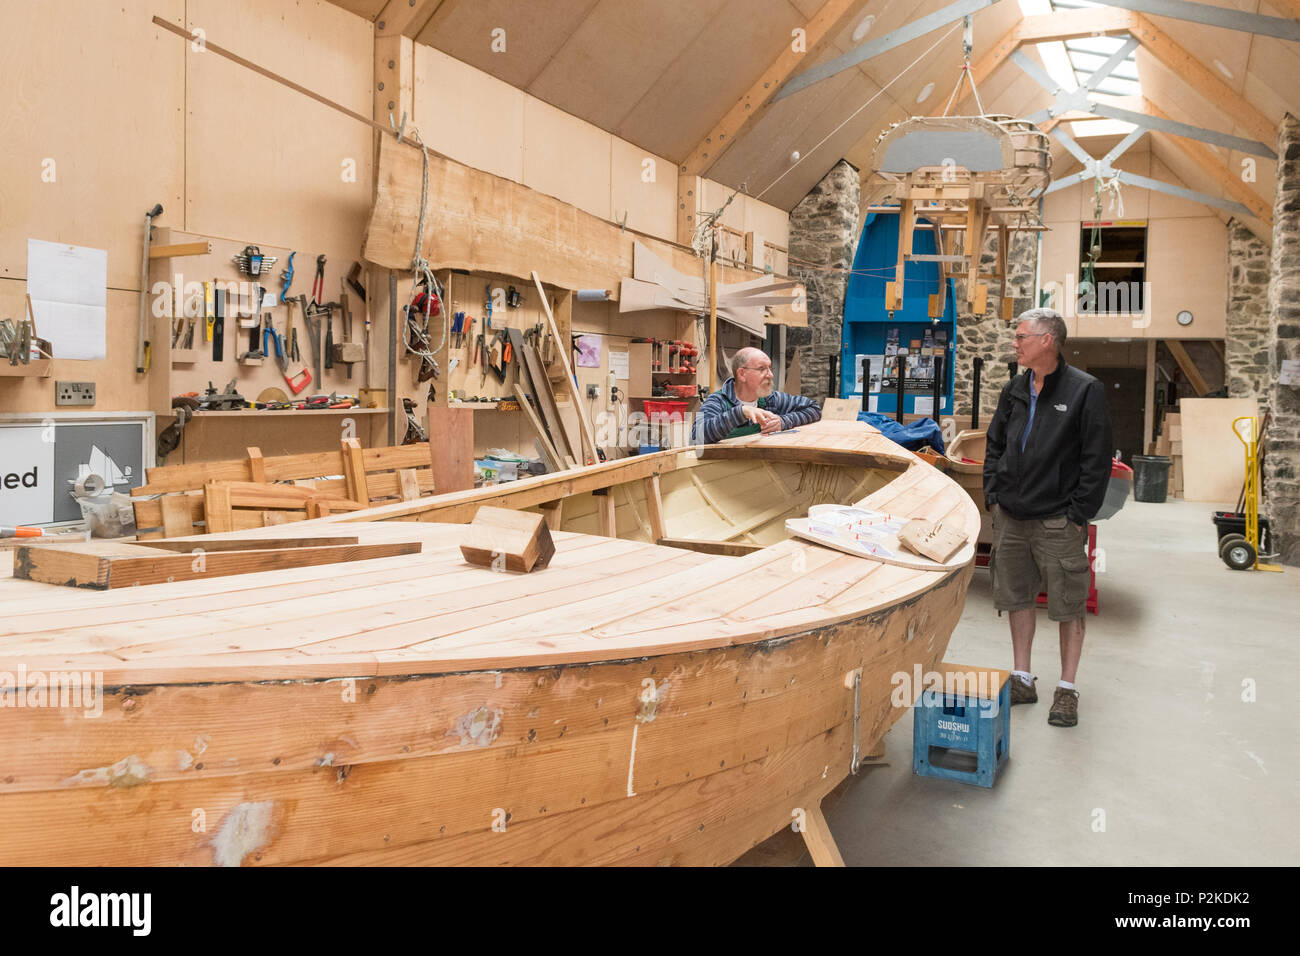 The Boatshed, Portsoy, Aberdeenshire, Scotland - run by boatbuilding volunteers for comminity boatbuilding projects and school boatbuilding sessions Stock Photo